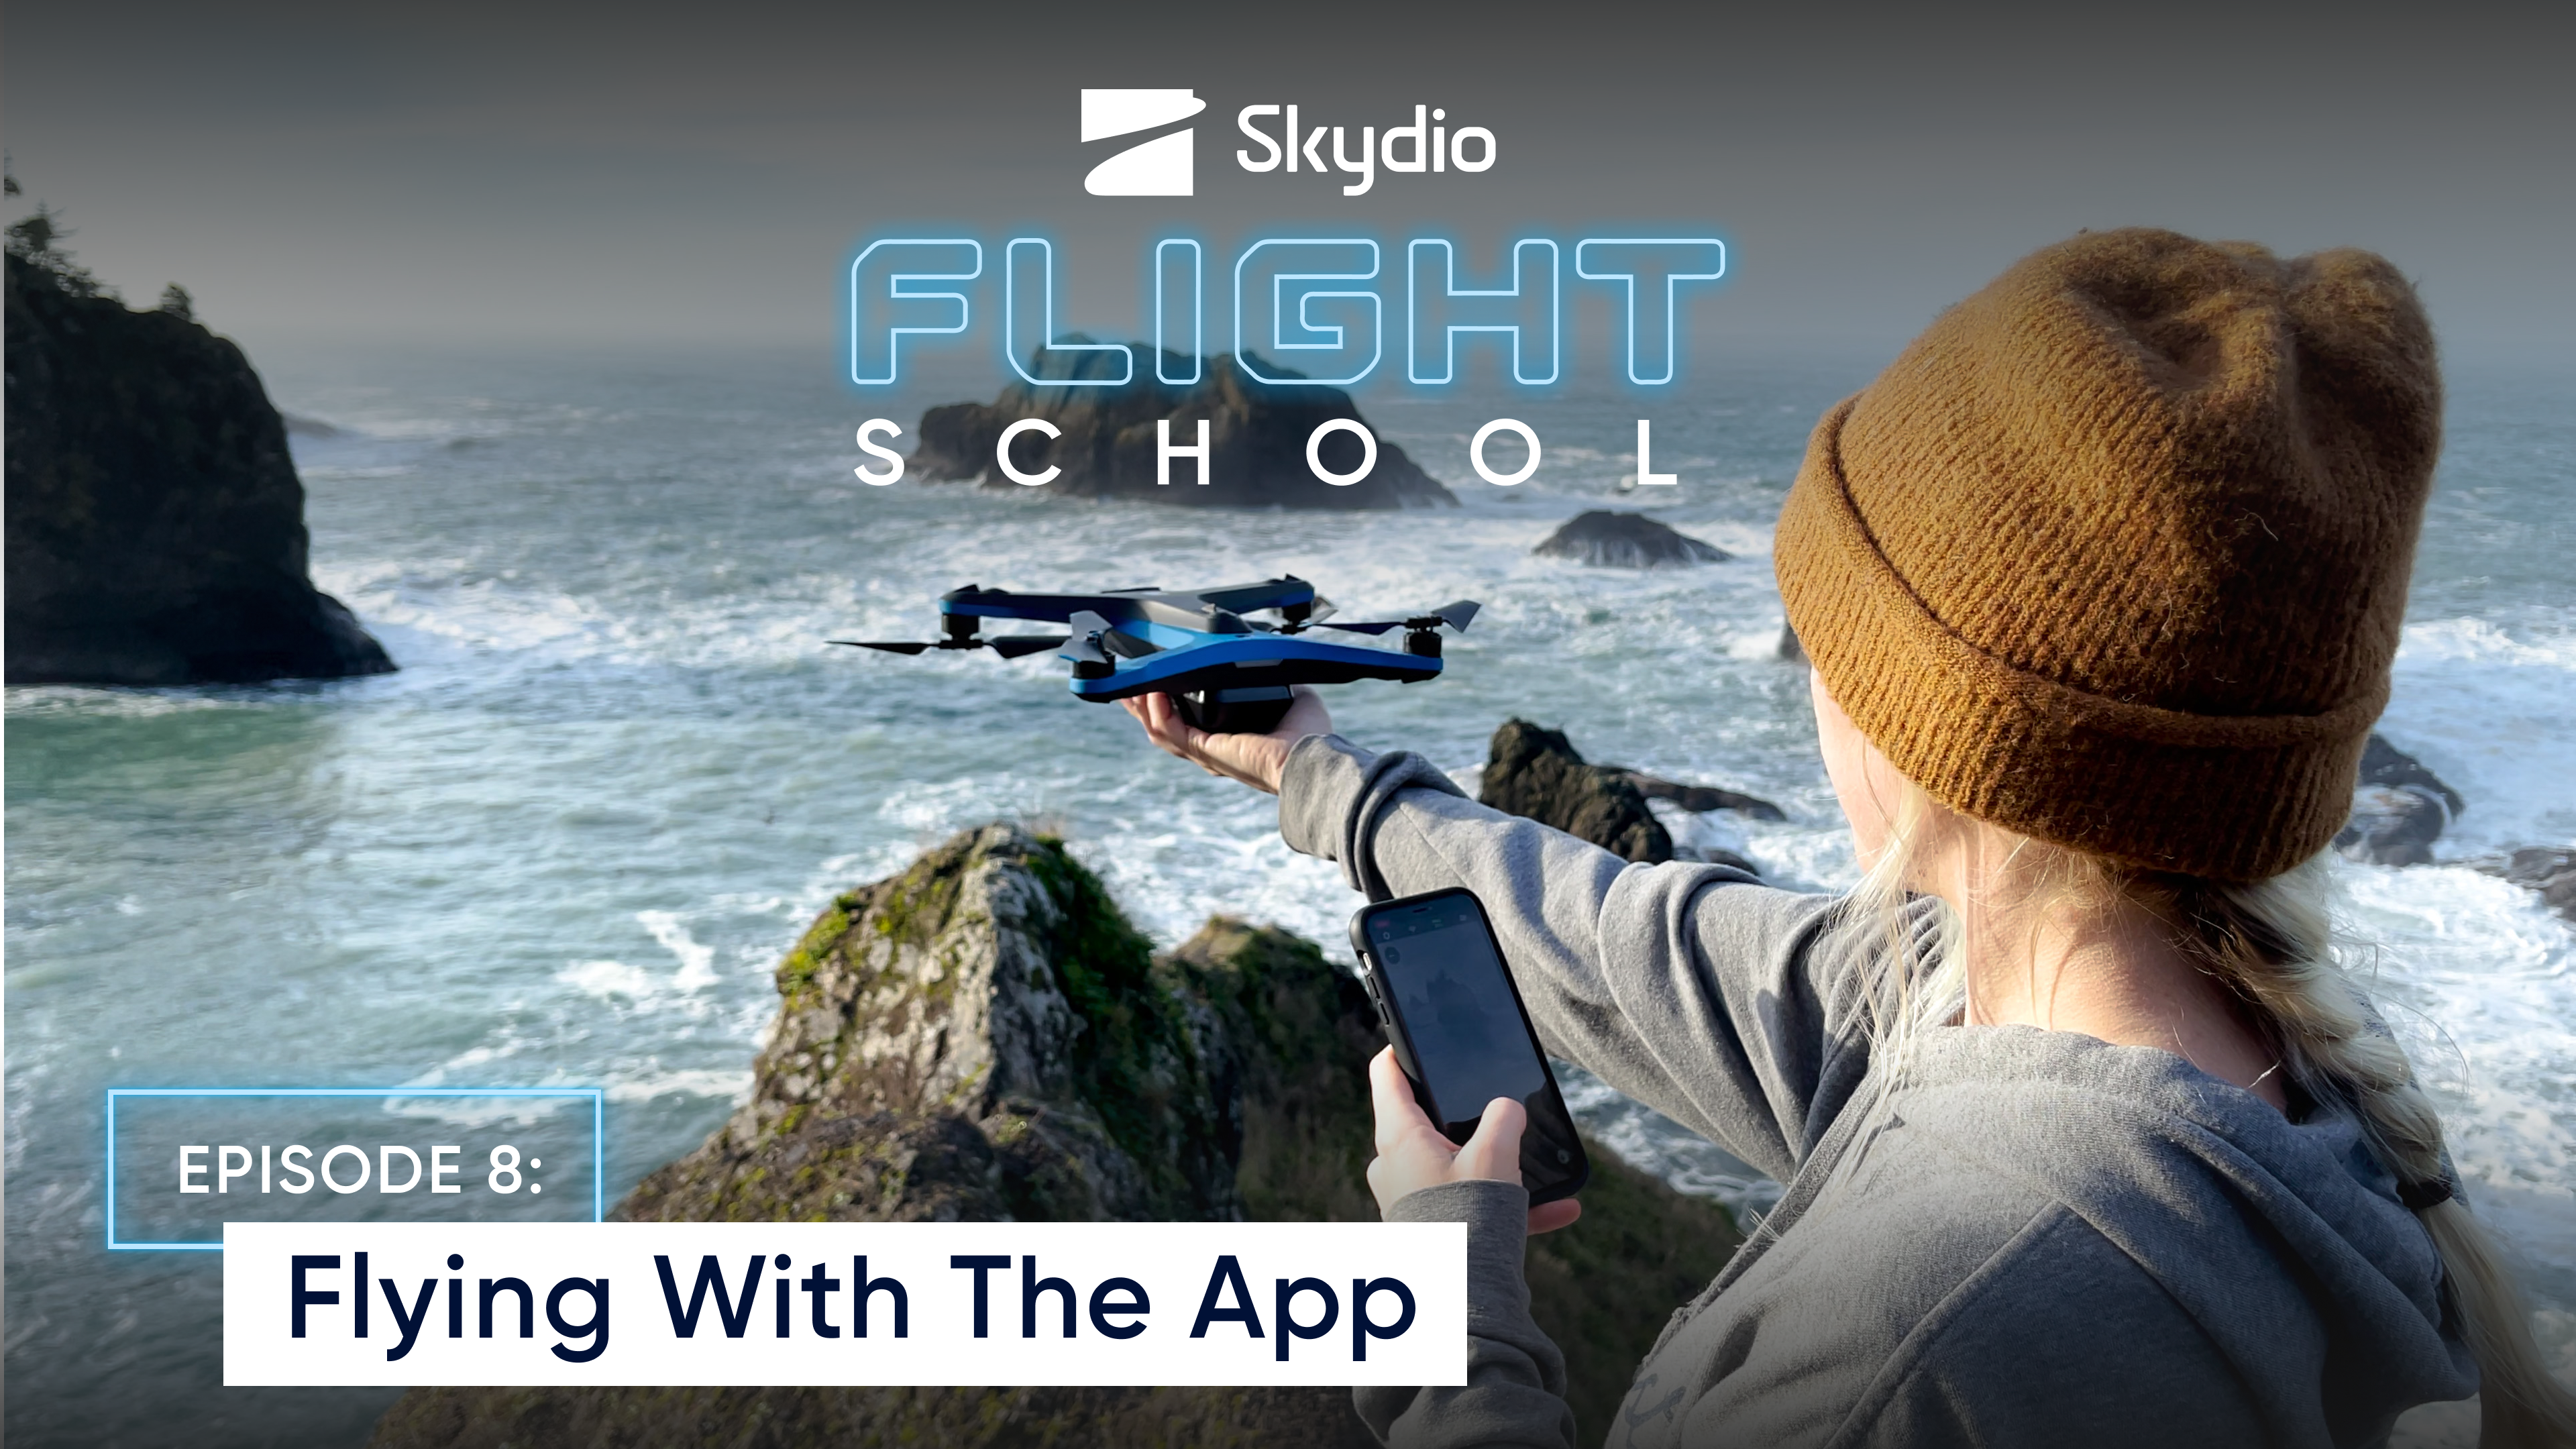 Flying with the app